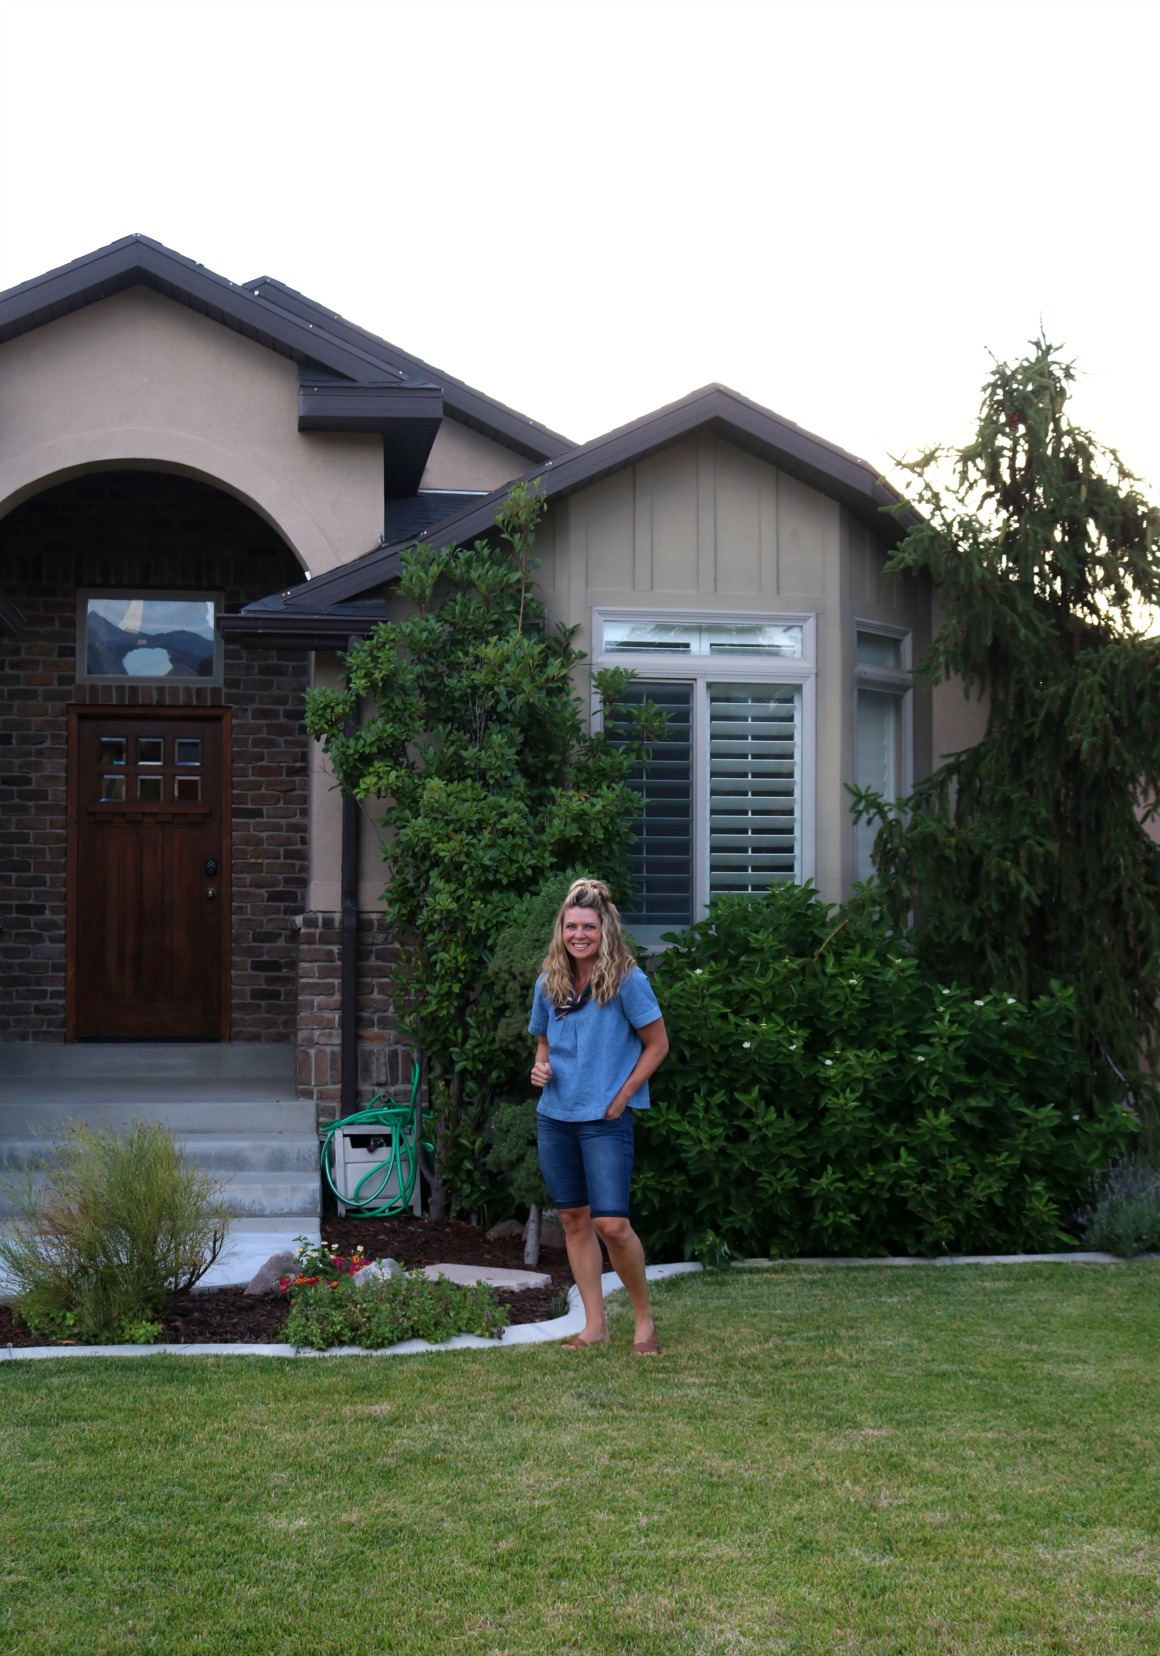 Our Utah Home Tour and Tips to Downsizing and Moving